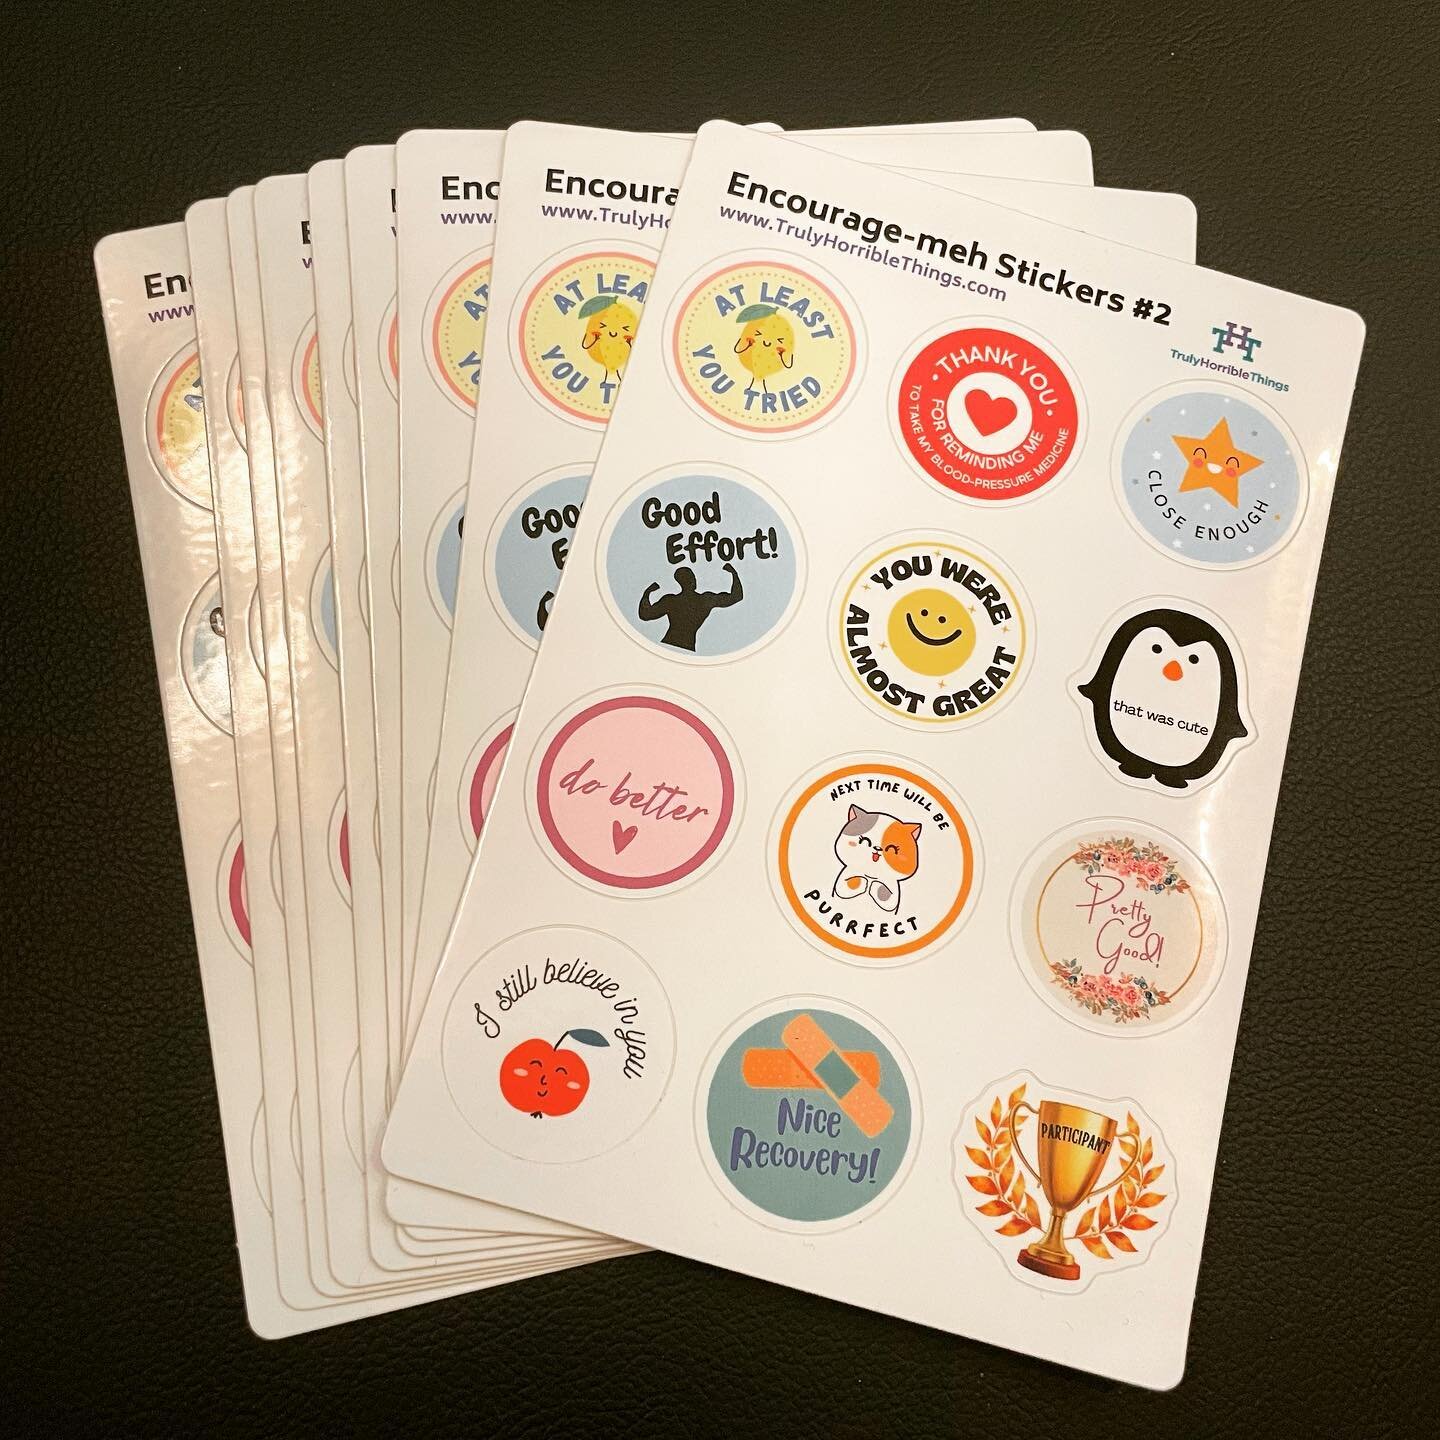 You may have seen Encourage-meh Sticker Sheet #2 at events. It&rsquo;s available online now! Show them how you really feel. Meh. There&rsquo;s also a combo option to get sheets 1 and 2.  #encouragemeh #trulyhorriblethings https://www.trulyhorriblethi